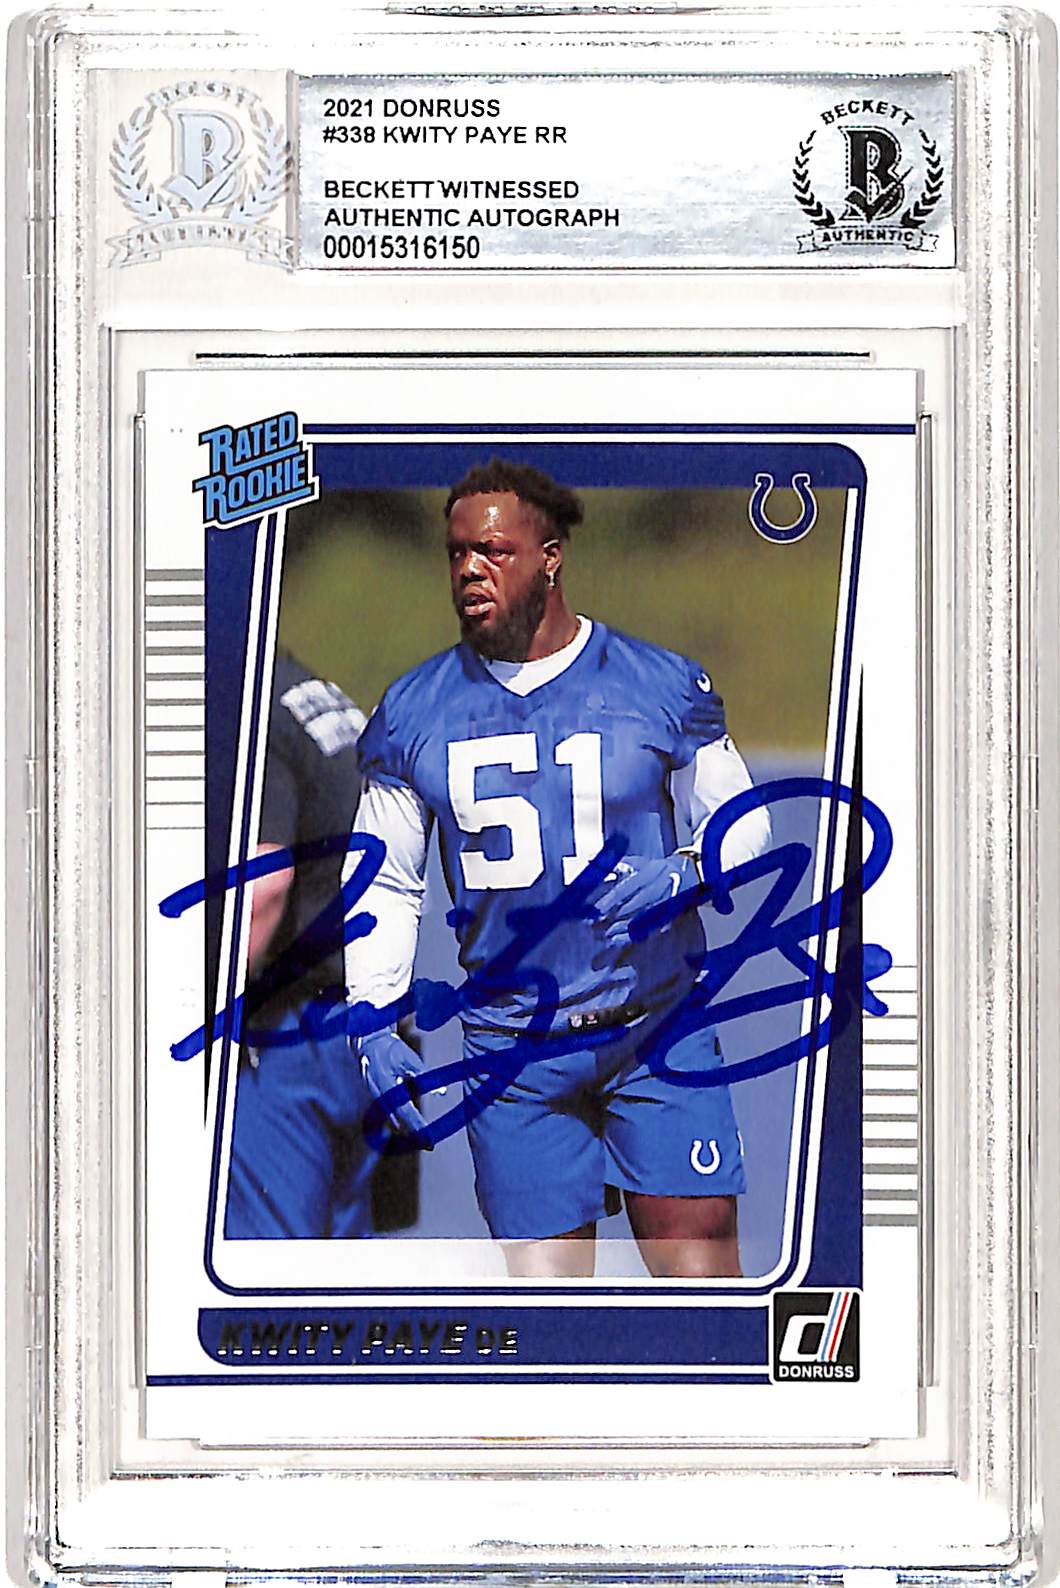 Kwity Paye Autographed Donruss 2021 #338 Trading Card Slabbed Beckett